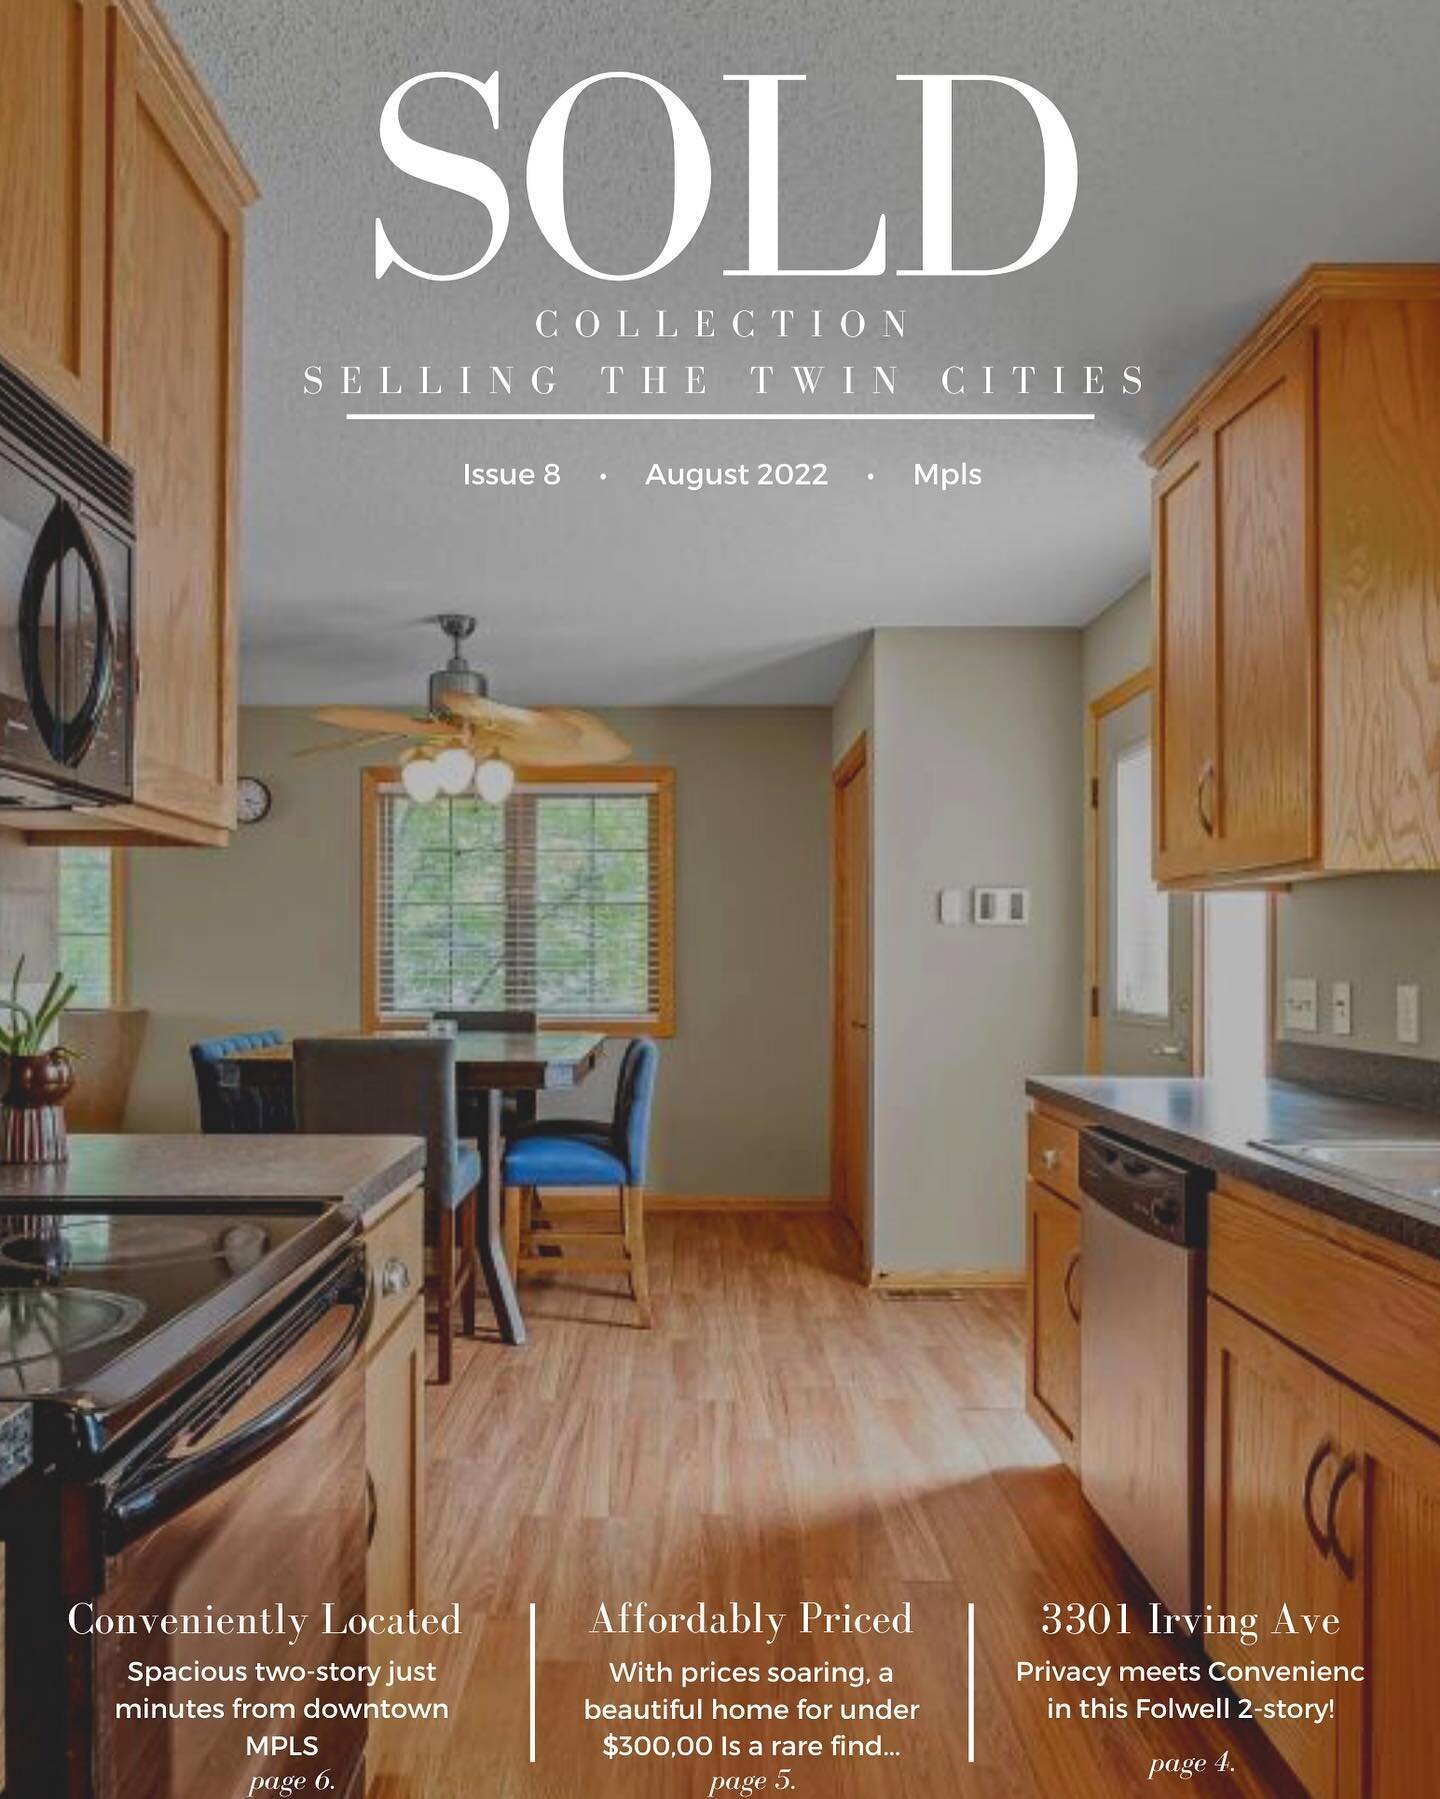 CLOSING one Chapter to open another 📖

You gotta love it when a plan comes together. 
Even more so when family and friends are involved. The journey of selling your home should include a few things&hellip;

Lots of memorable moments&hellip;

YOUR go